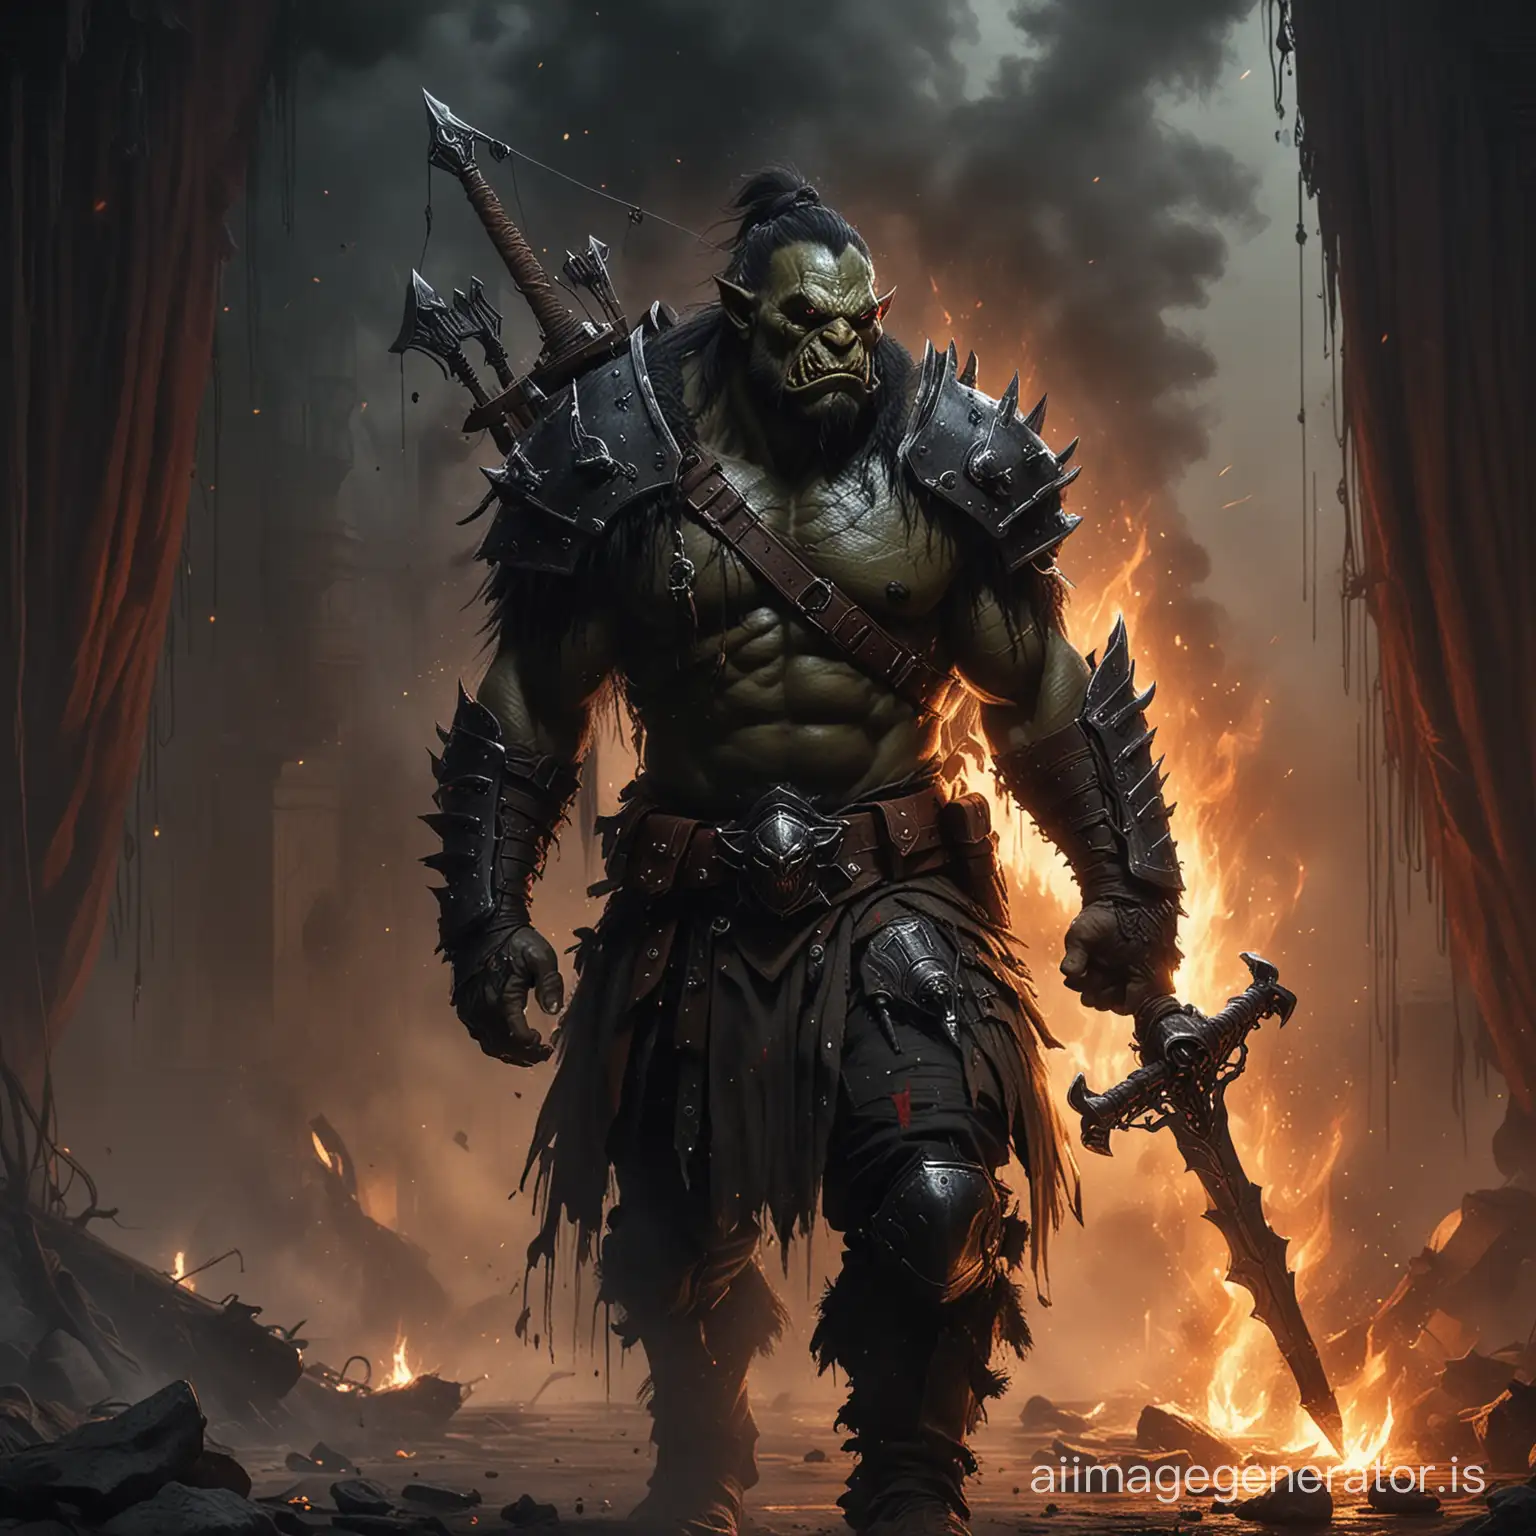 Intense-Orc-Warrior-in-Dark-Armor-Amidst-Fiery-Chaos